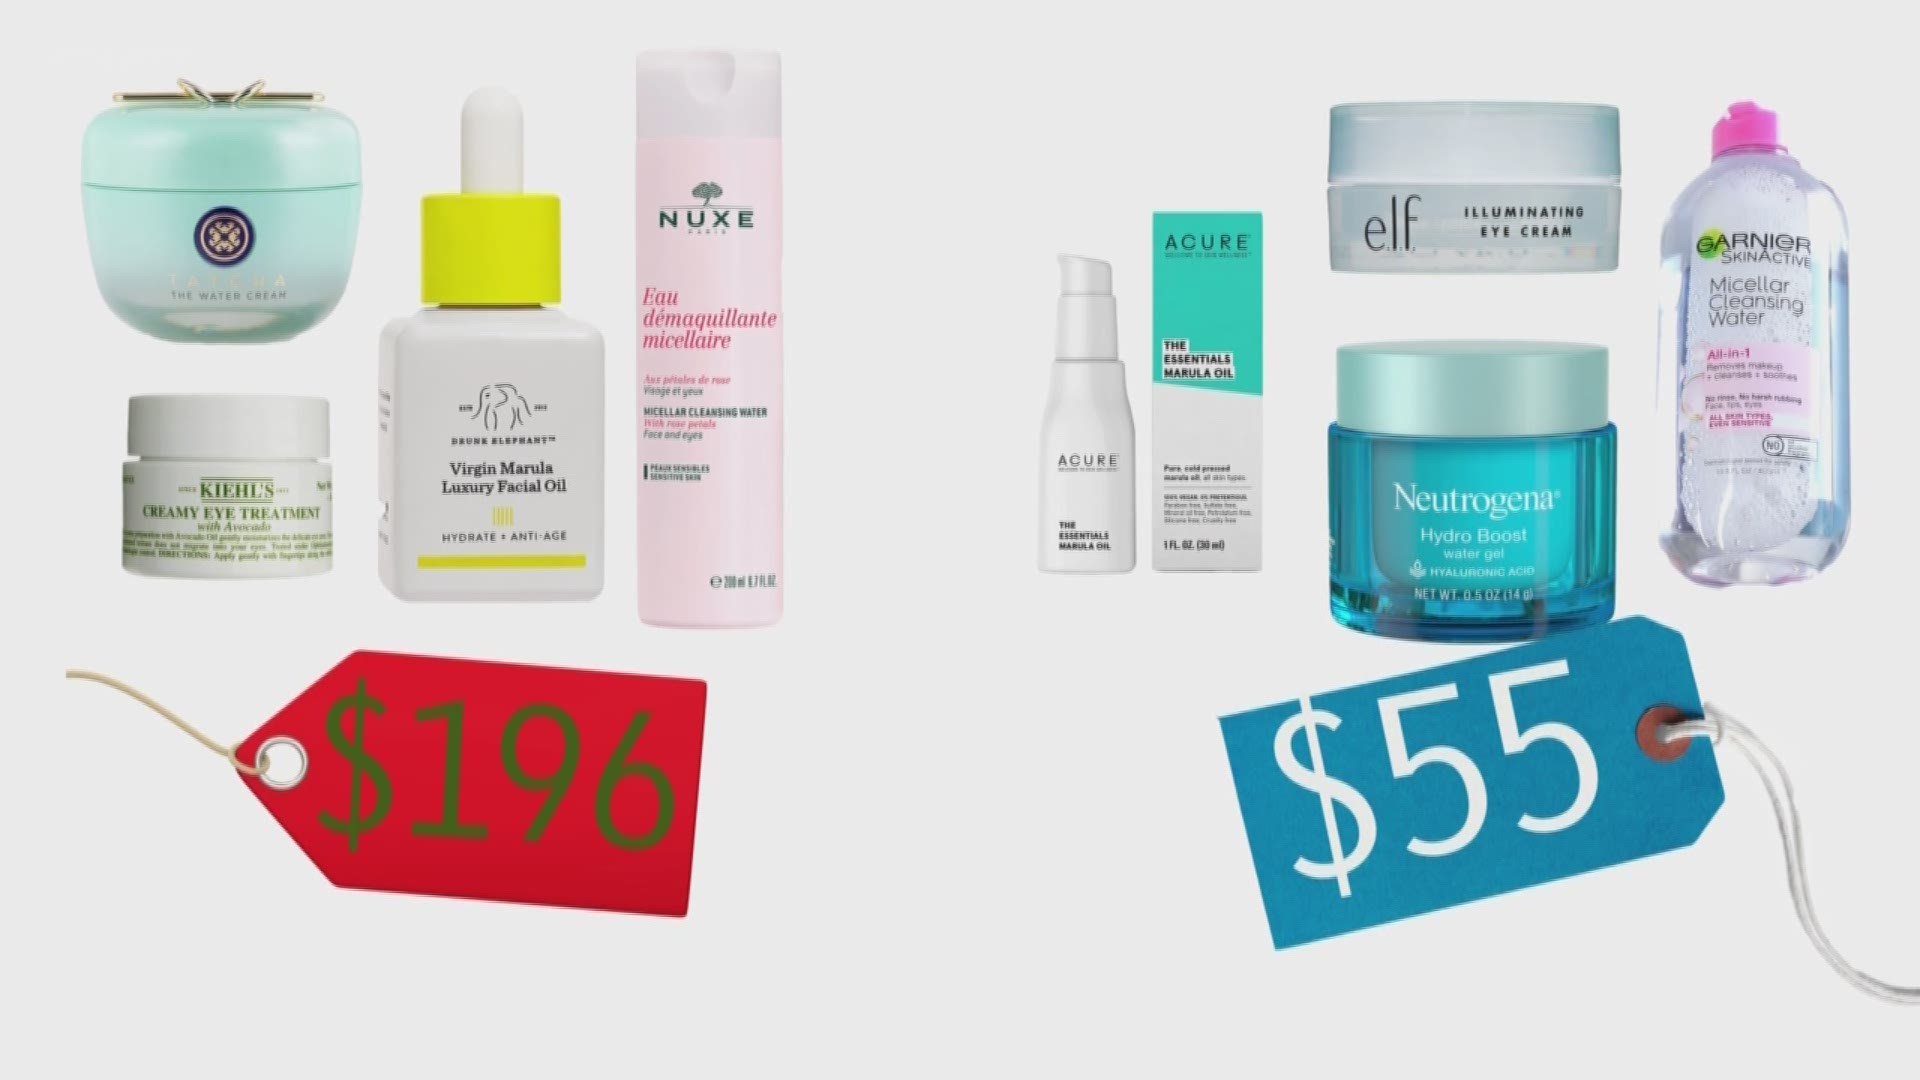 There are so many advertisements for the perfect high-end skincare products. But the cost can add up!